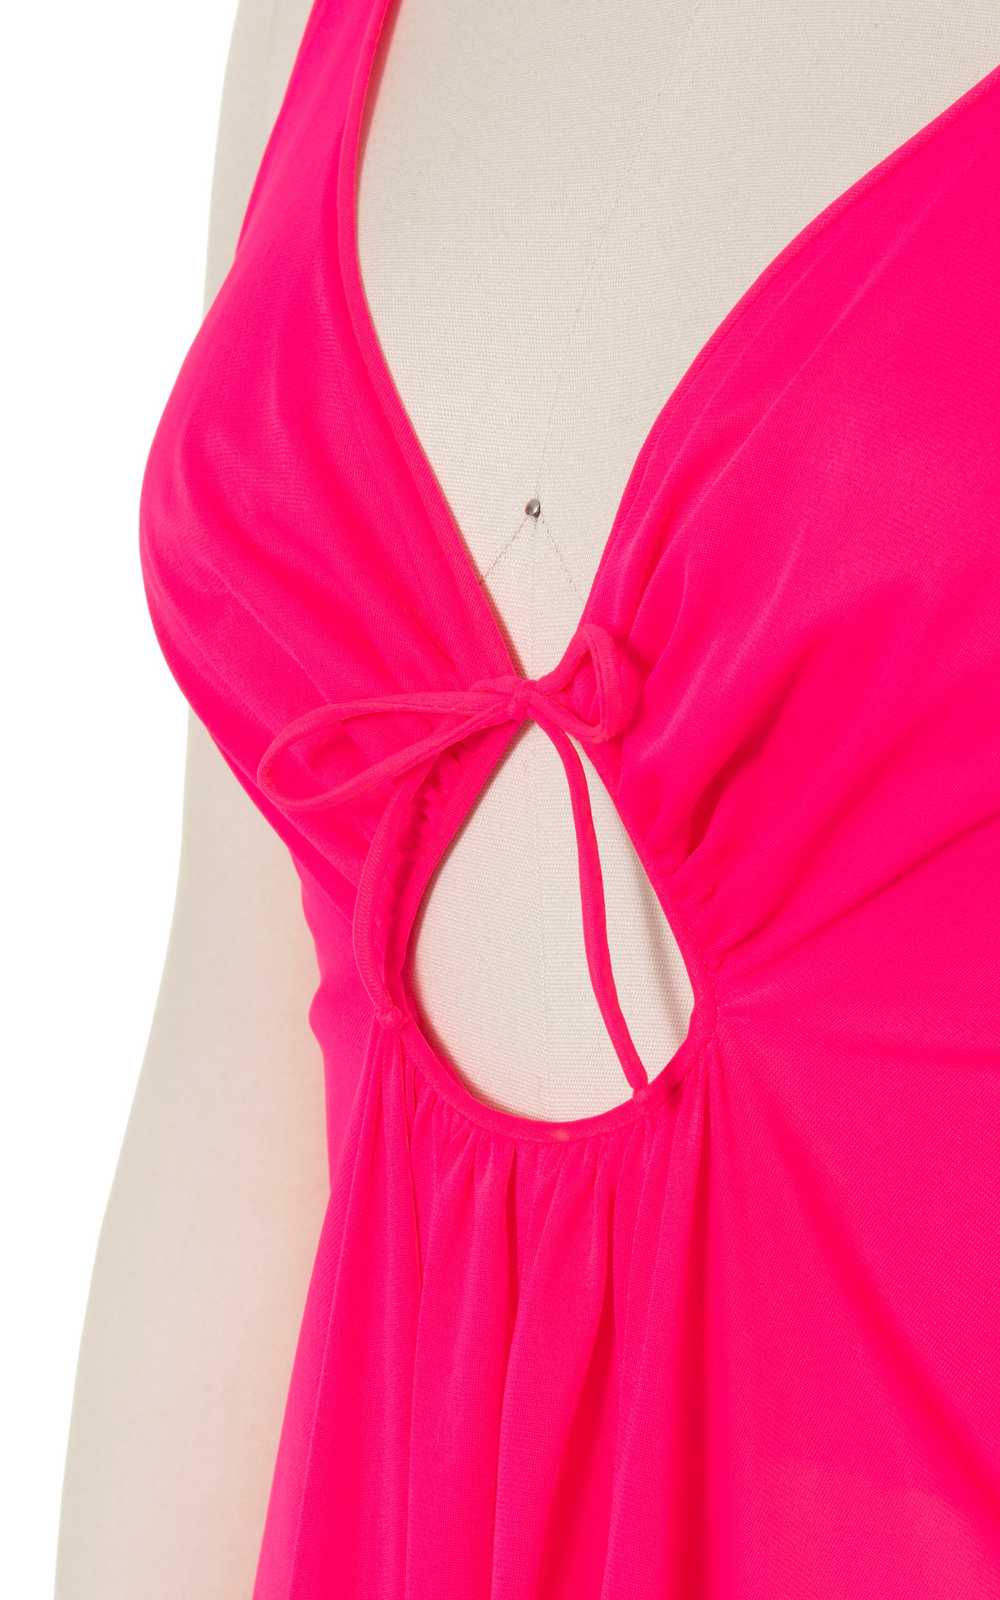 1970s Neon Hot Pink Nightgown | small/medium/large - image 2